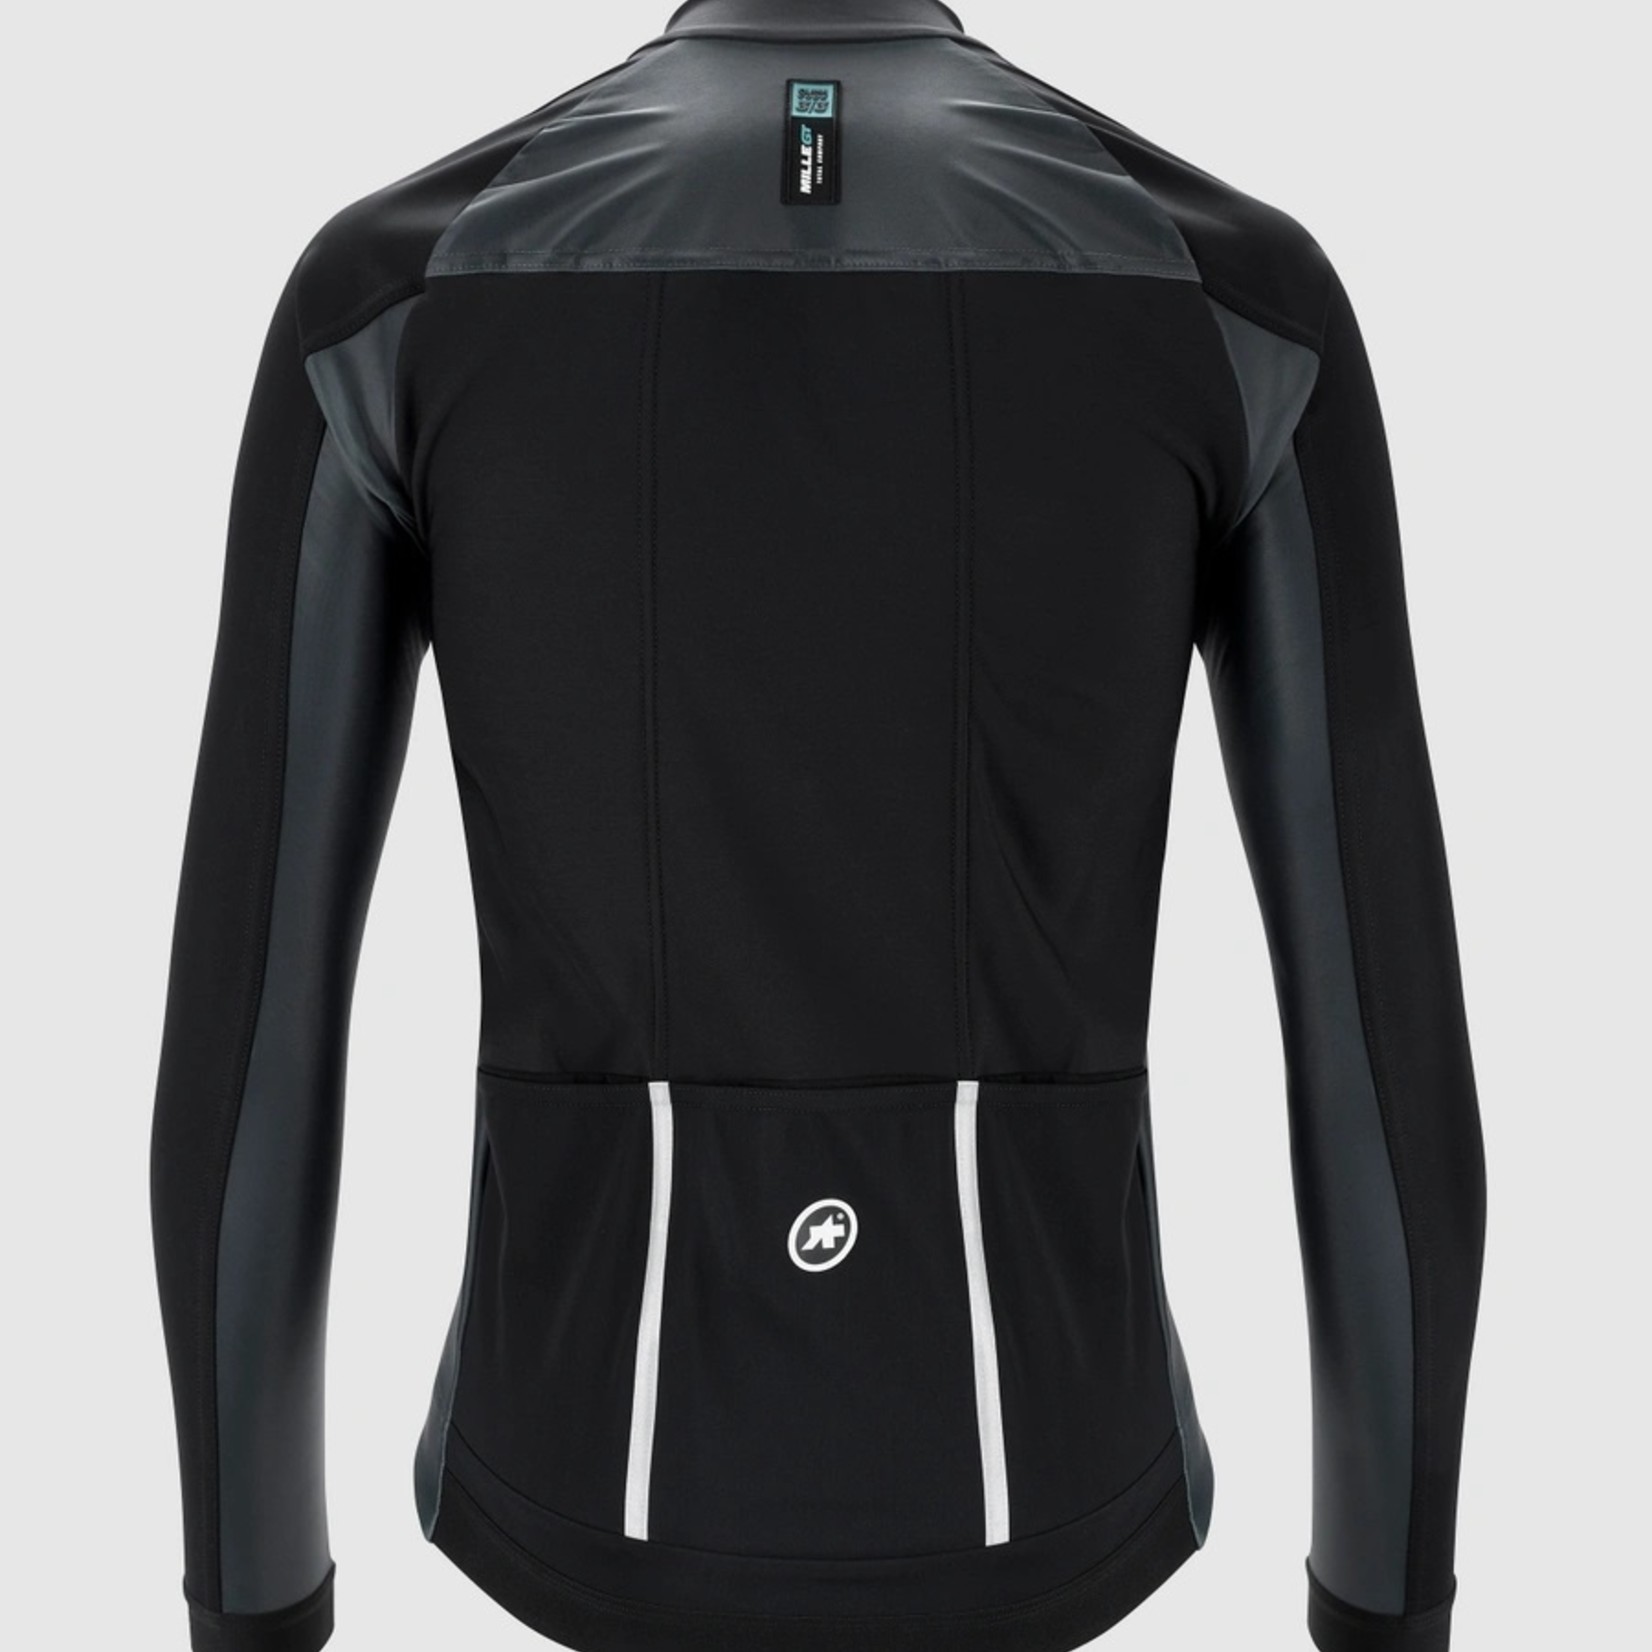 ASSOS, MILLE GT Winter Jacket EVO - The Cyclery